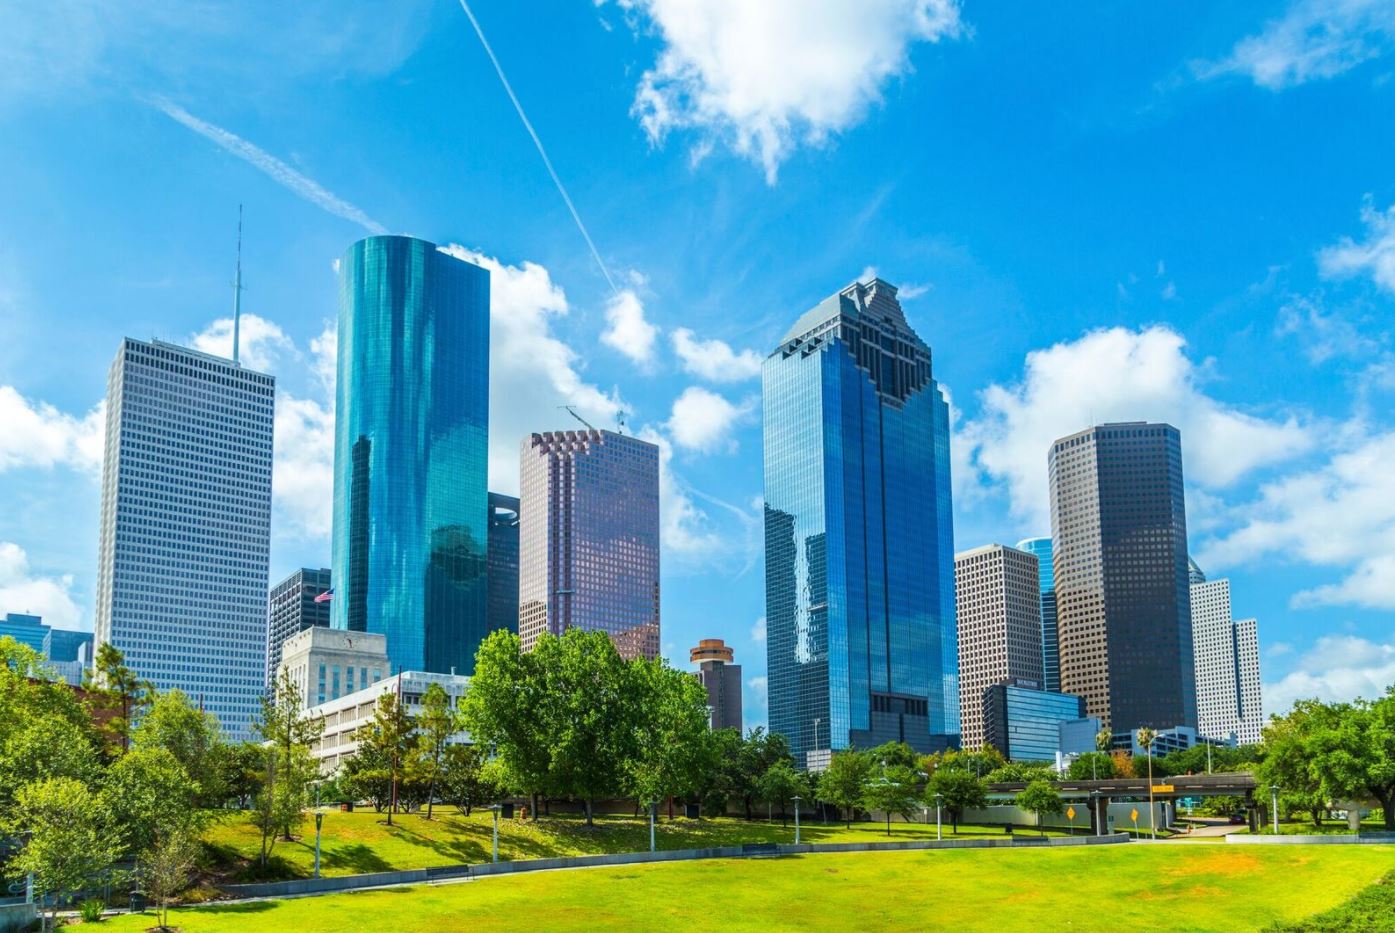 NexantECA Global Petrochemical Industry training course is returning to Houston this 10th – 12th May